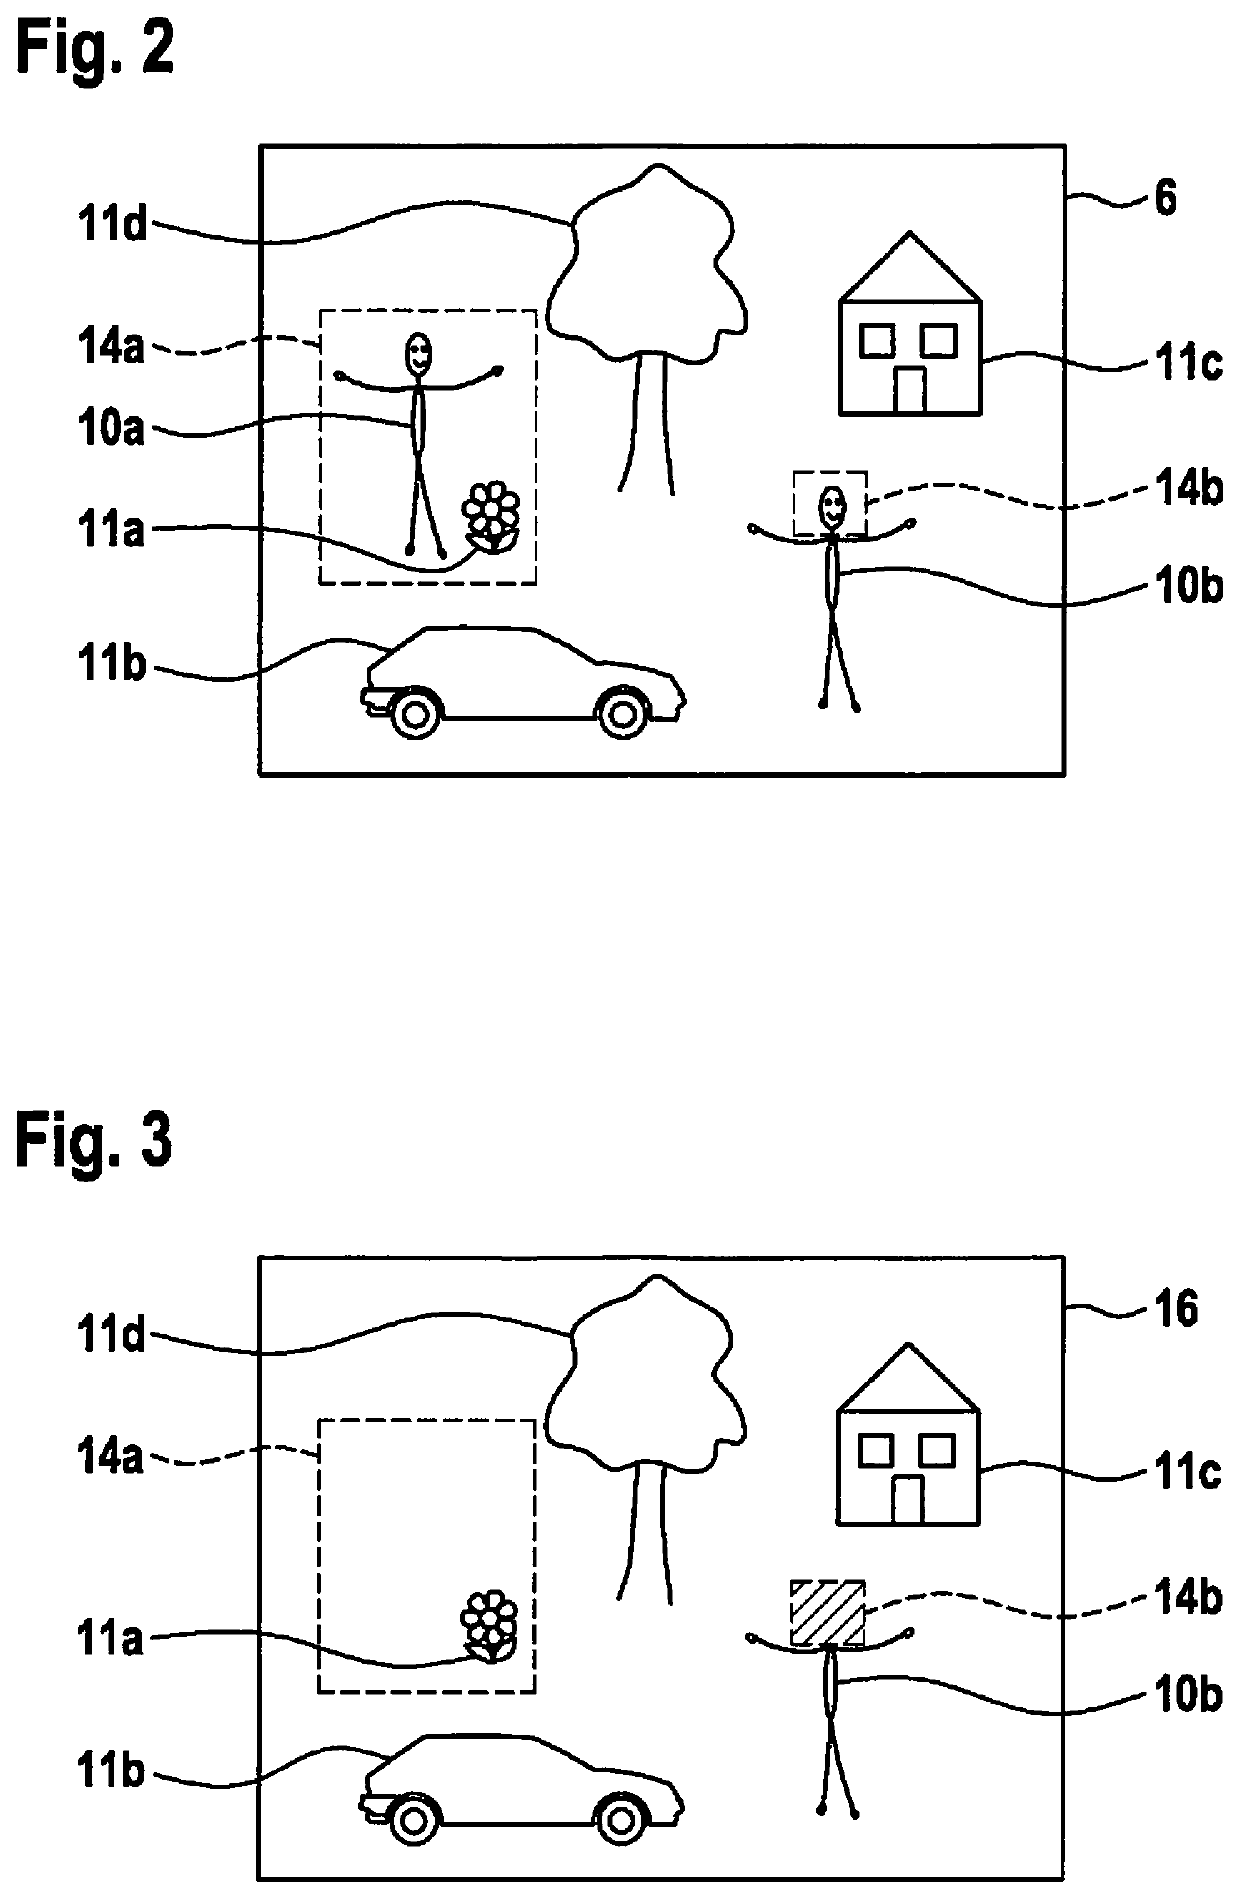 Camera for monitoring a monitored area and monitoring device, and method for monitoring a monitored area